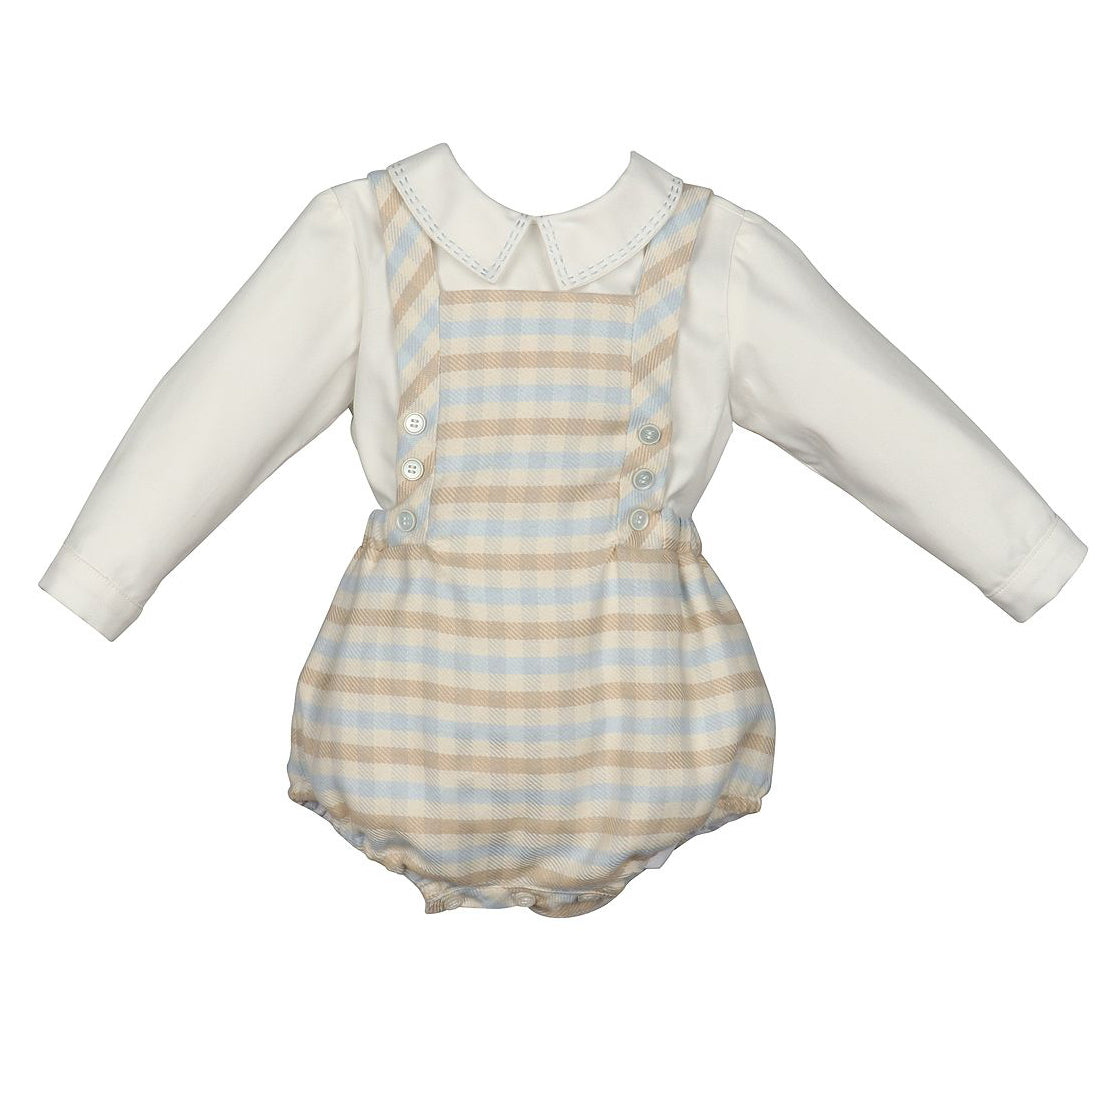 Tan Check Overall Bubble with Ivory Shirt